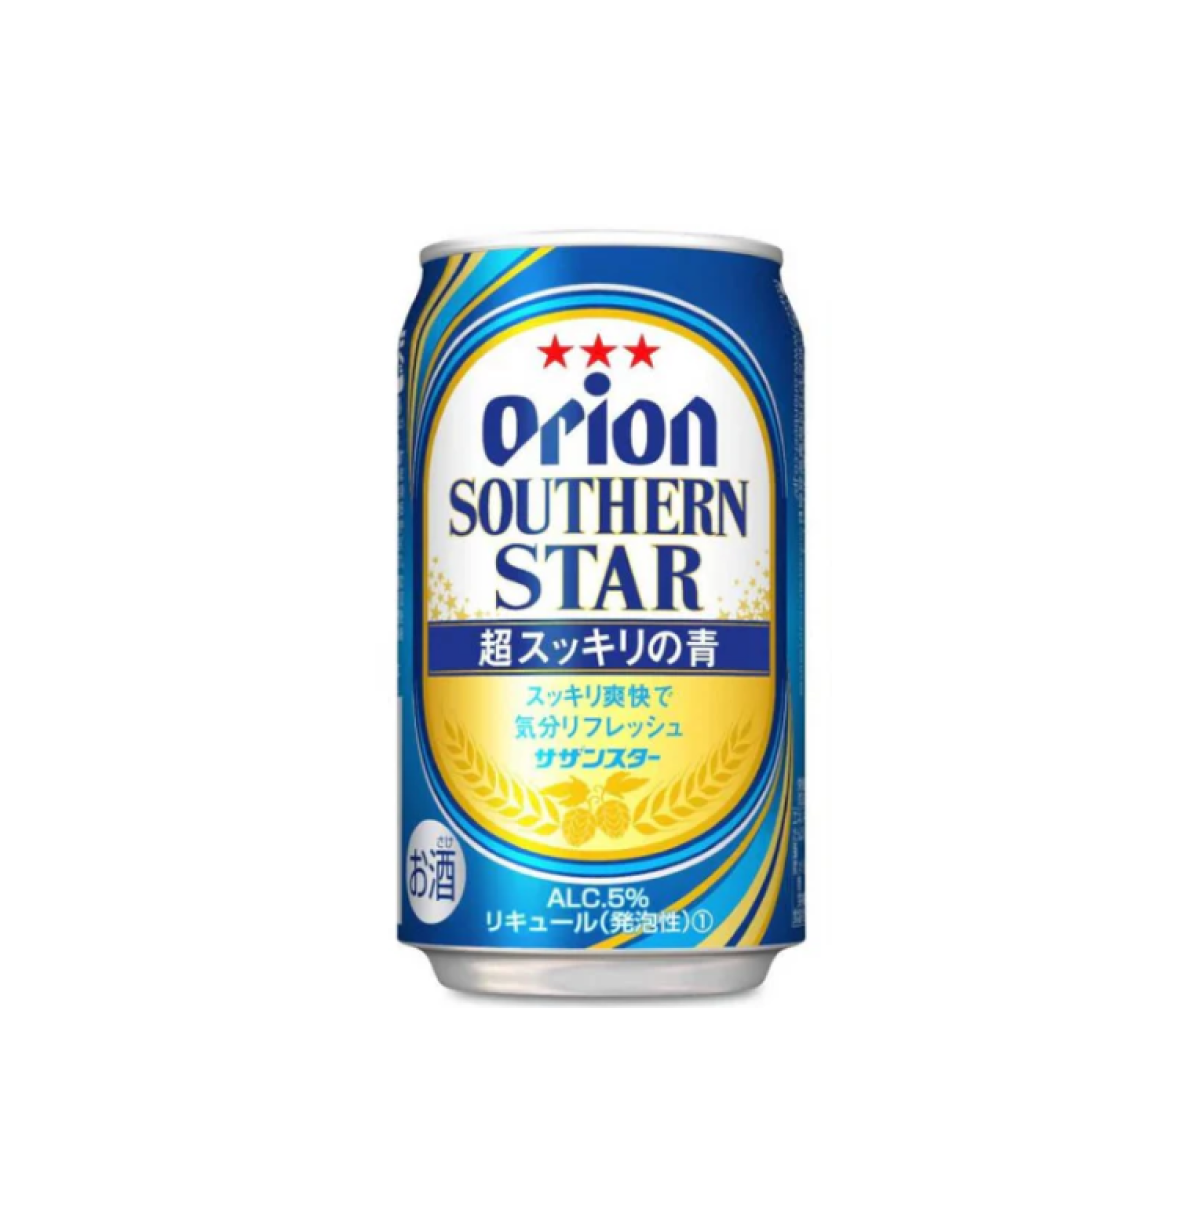 ORION Southern Star 啤酒 350ml